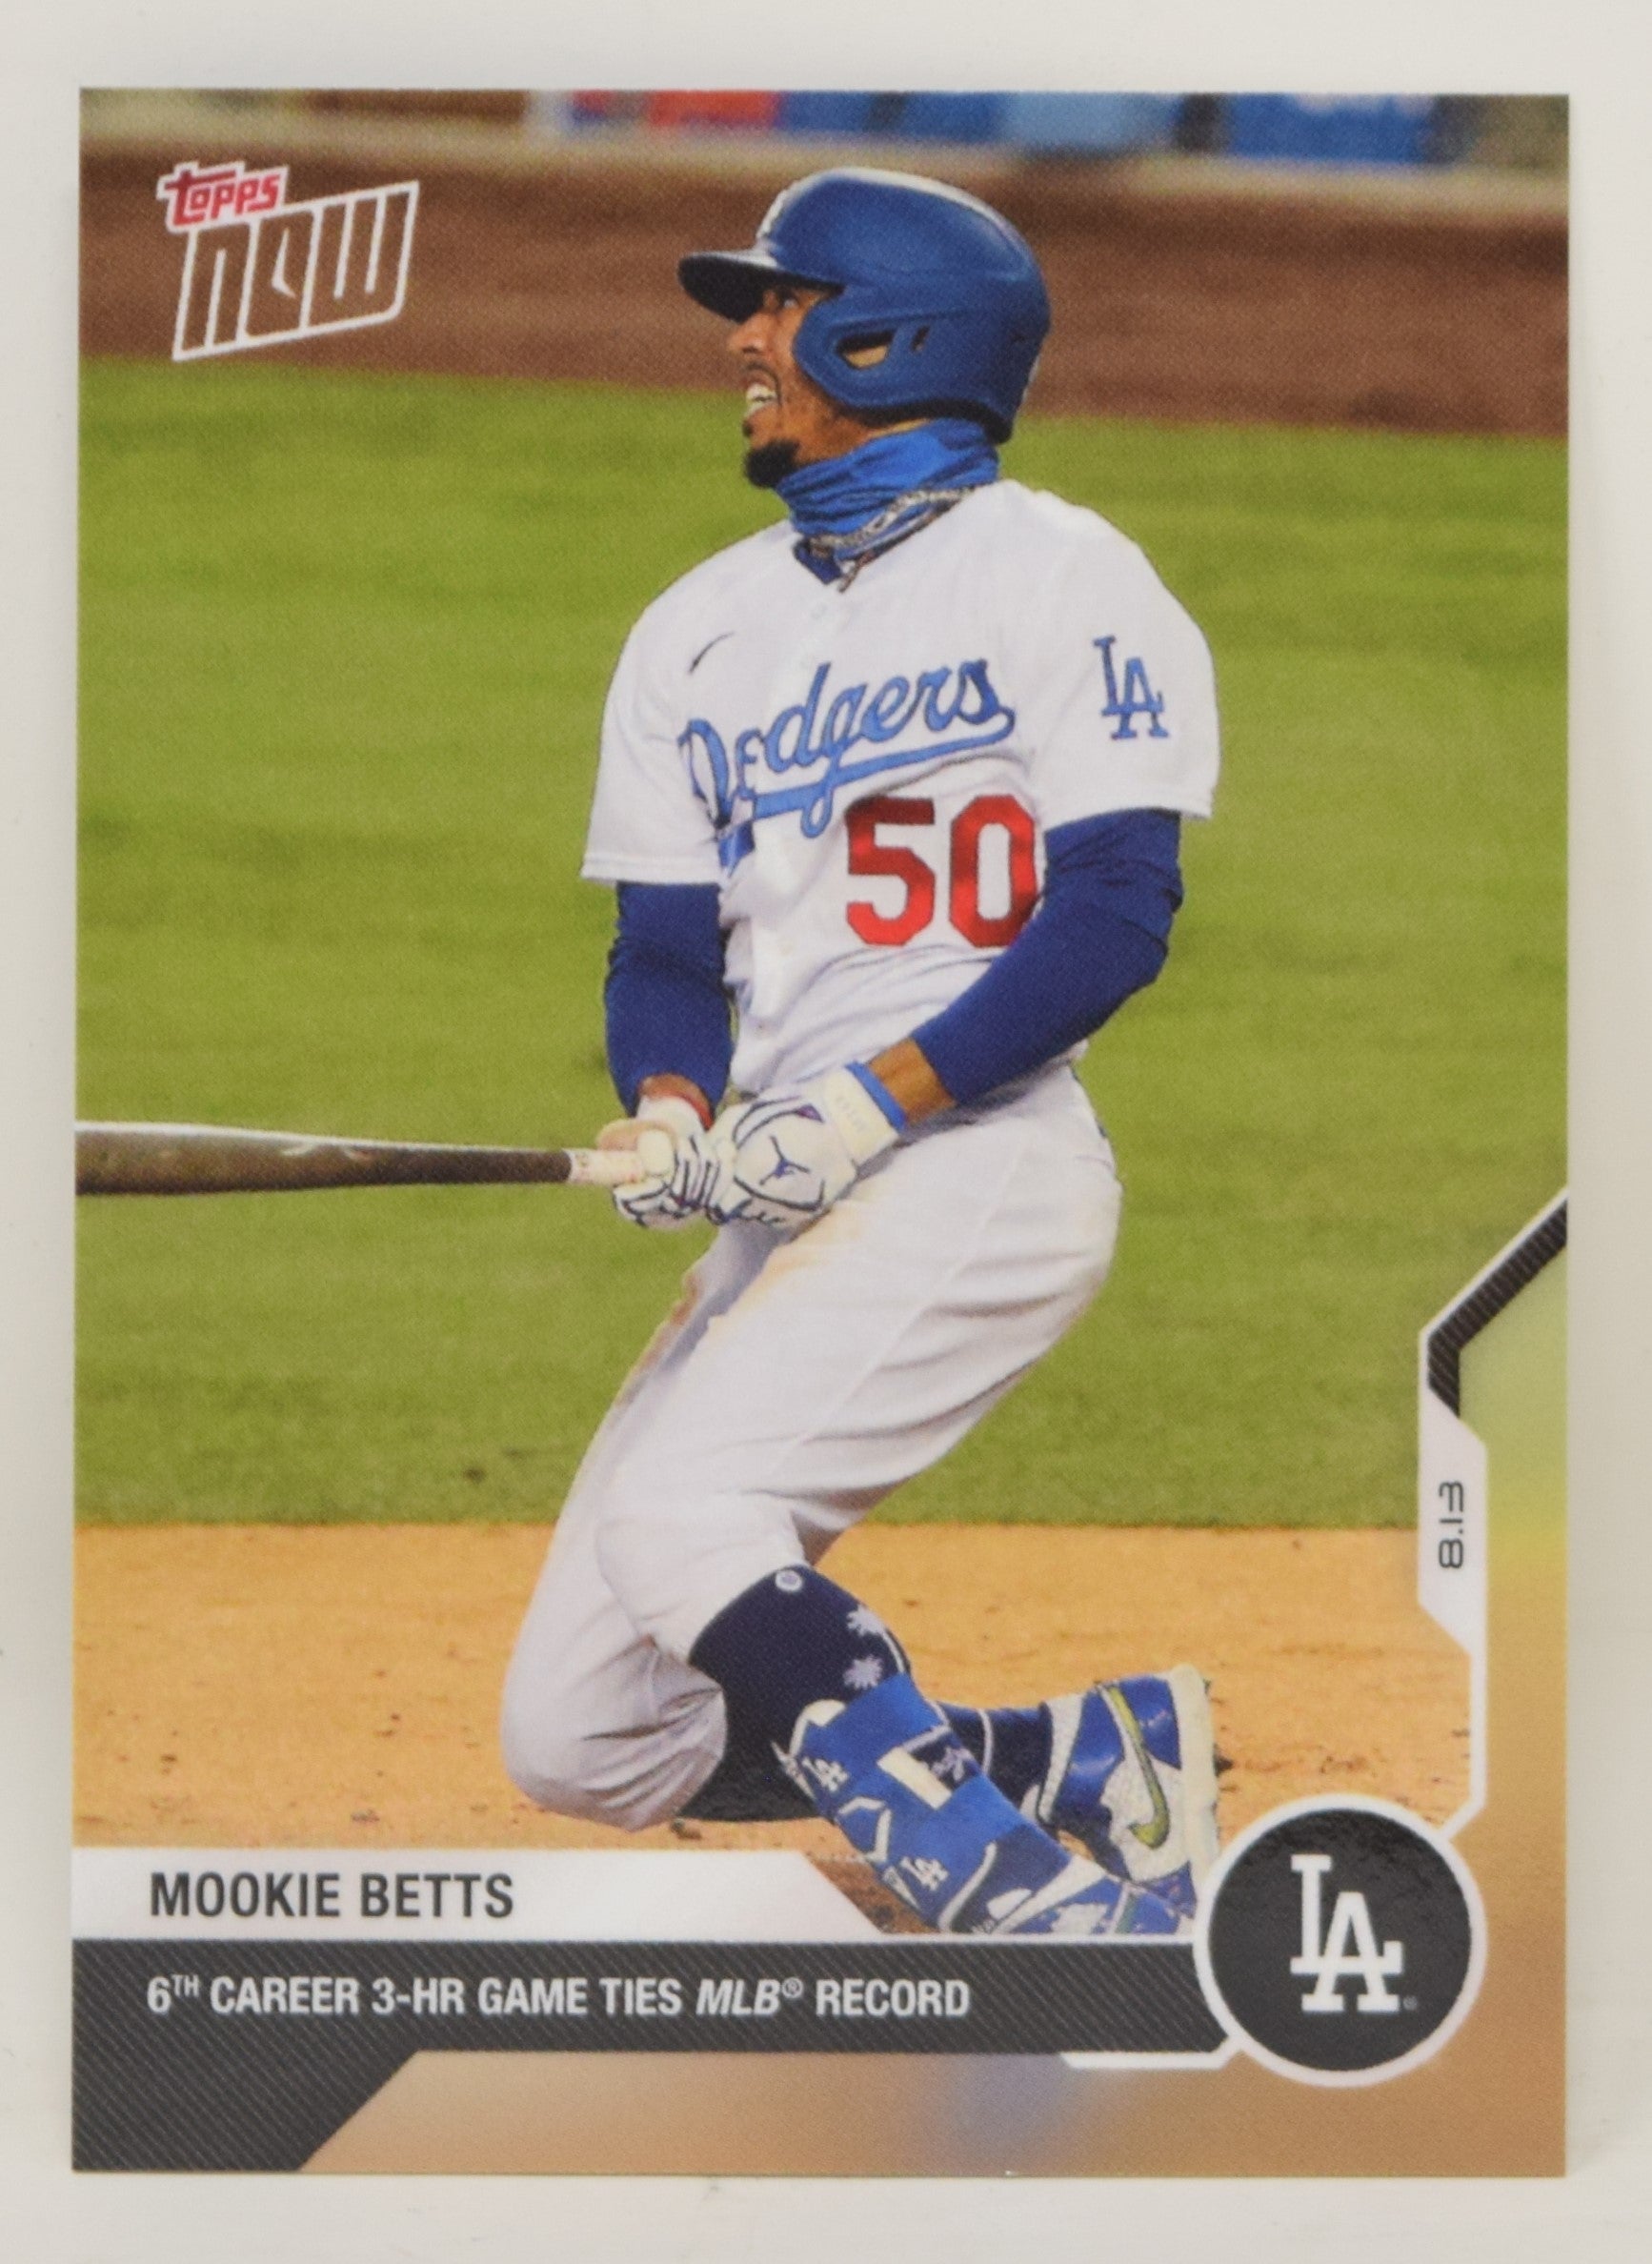 Mookie Betts Dodgers Baseball Player Coloring Book Page | Sticker